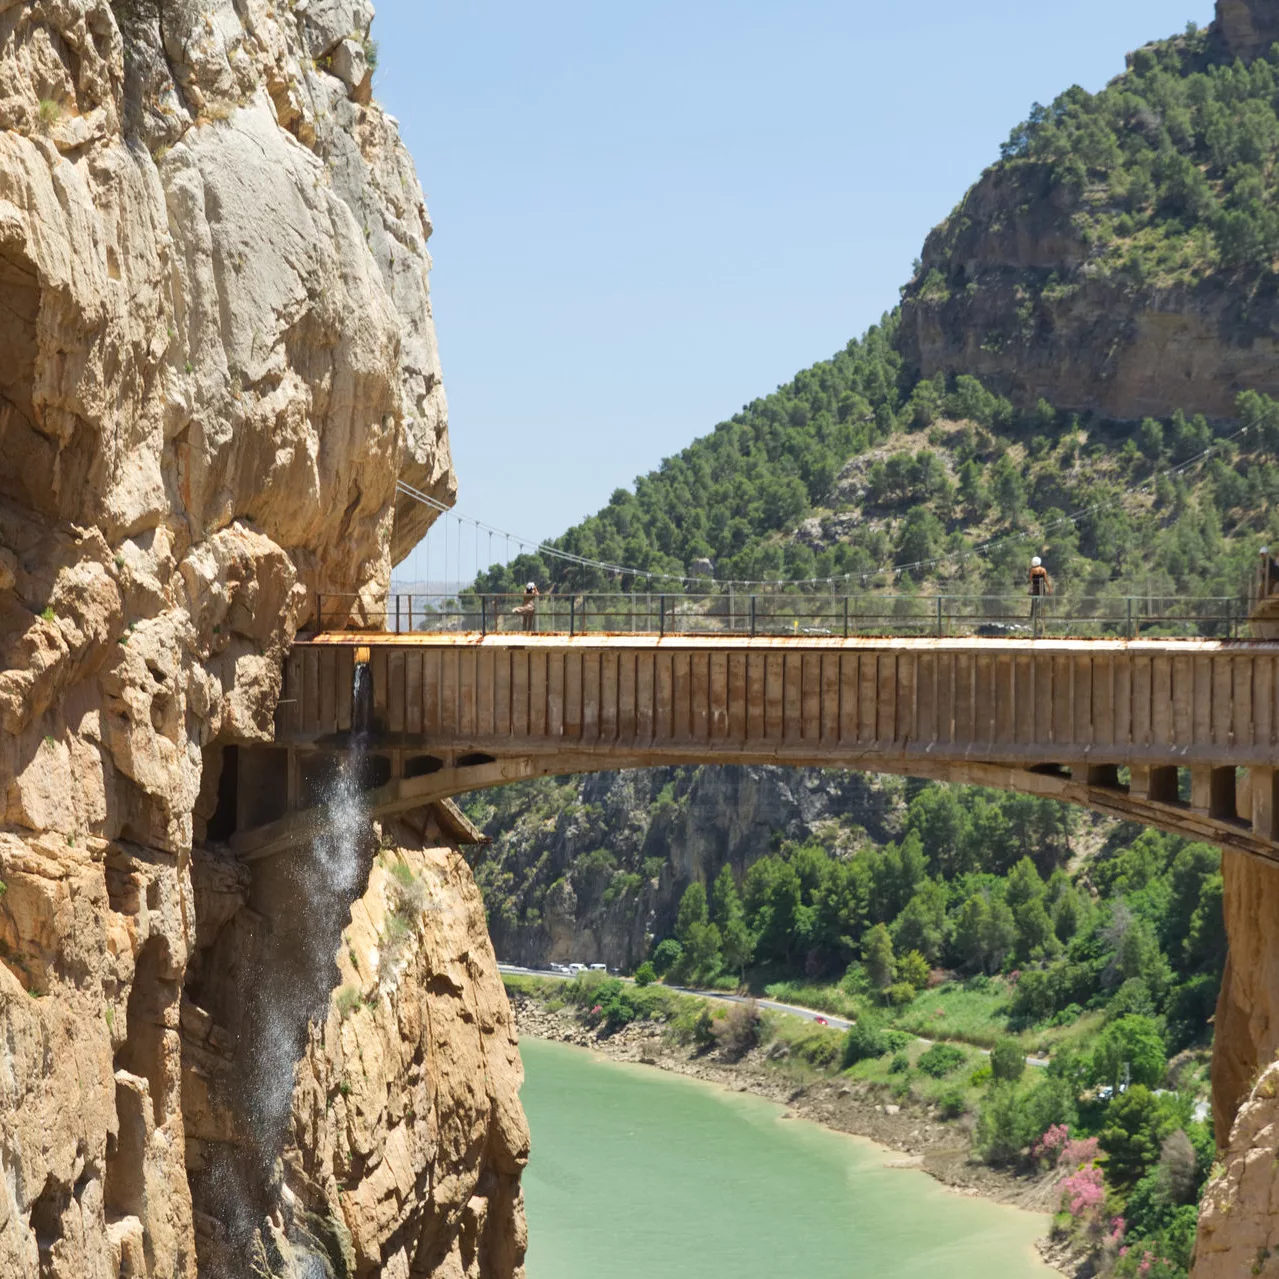 Caminito del rey
Itinerary for a Magic 7 Days in Southern Spain